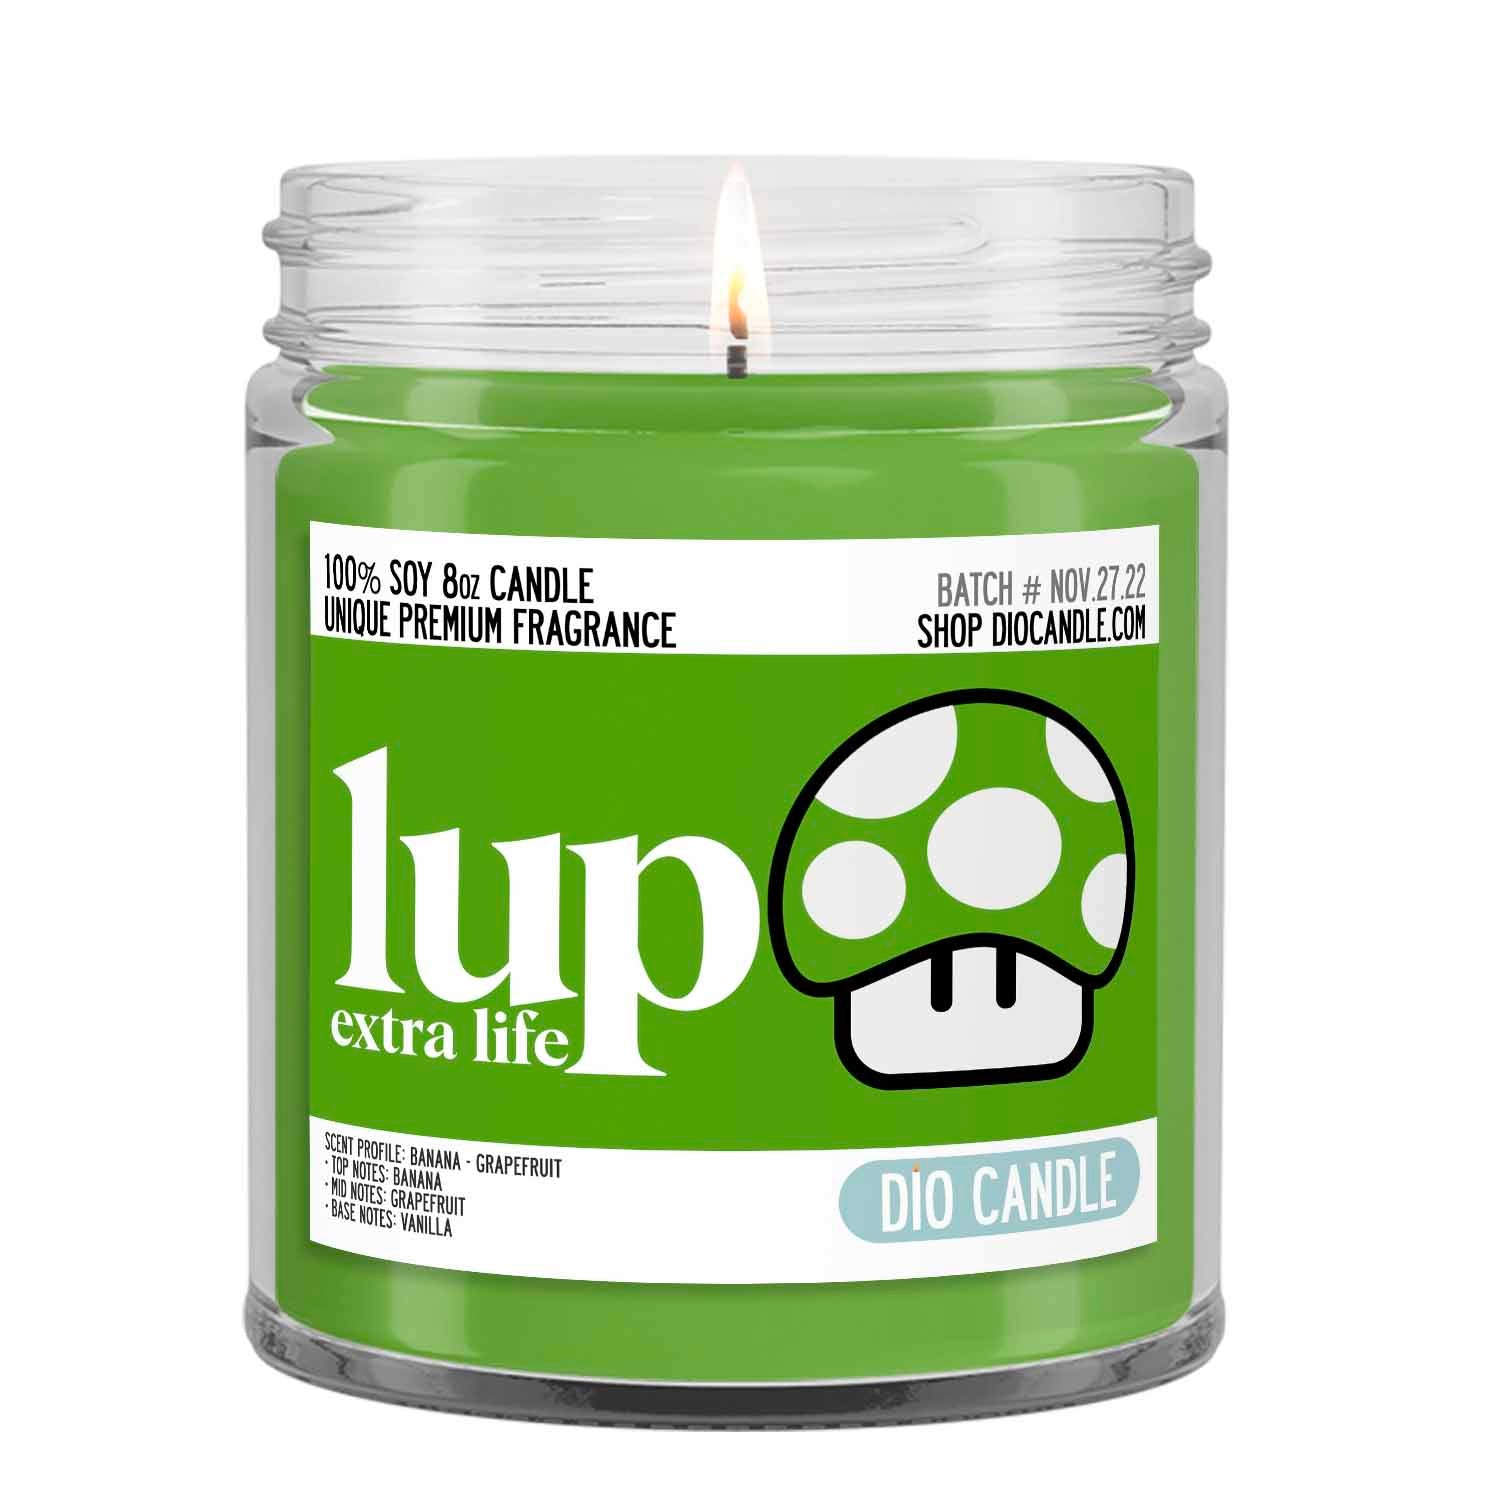 1 Up Extra Life Gaming Candle